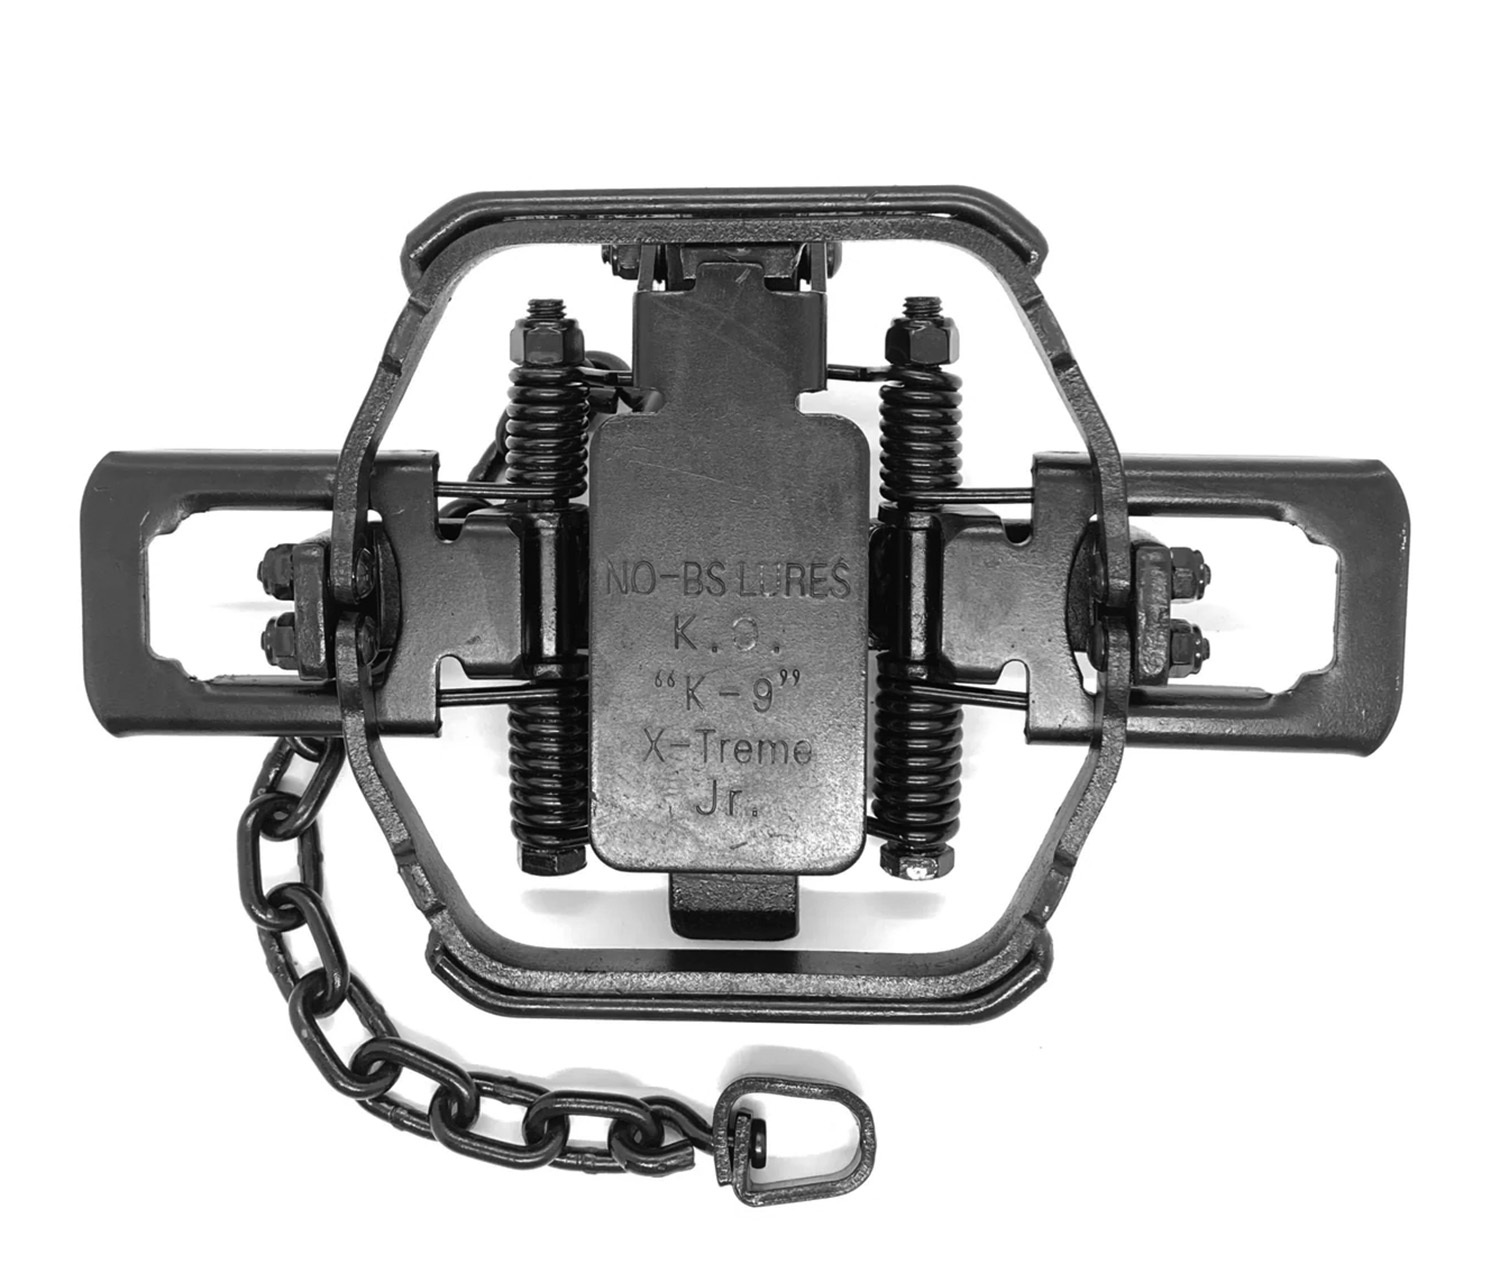 NO-BS K-9 X-Treme Junior Coil Spring Trap - Offset - Laminated - 4 Coiled